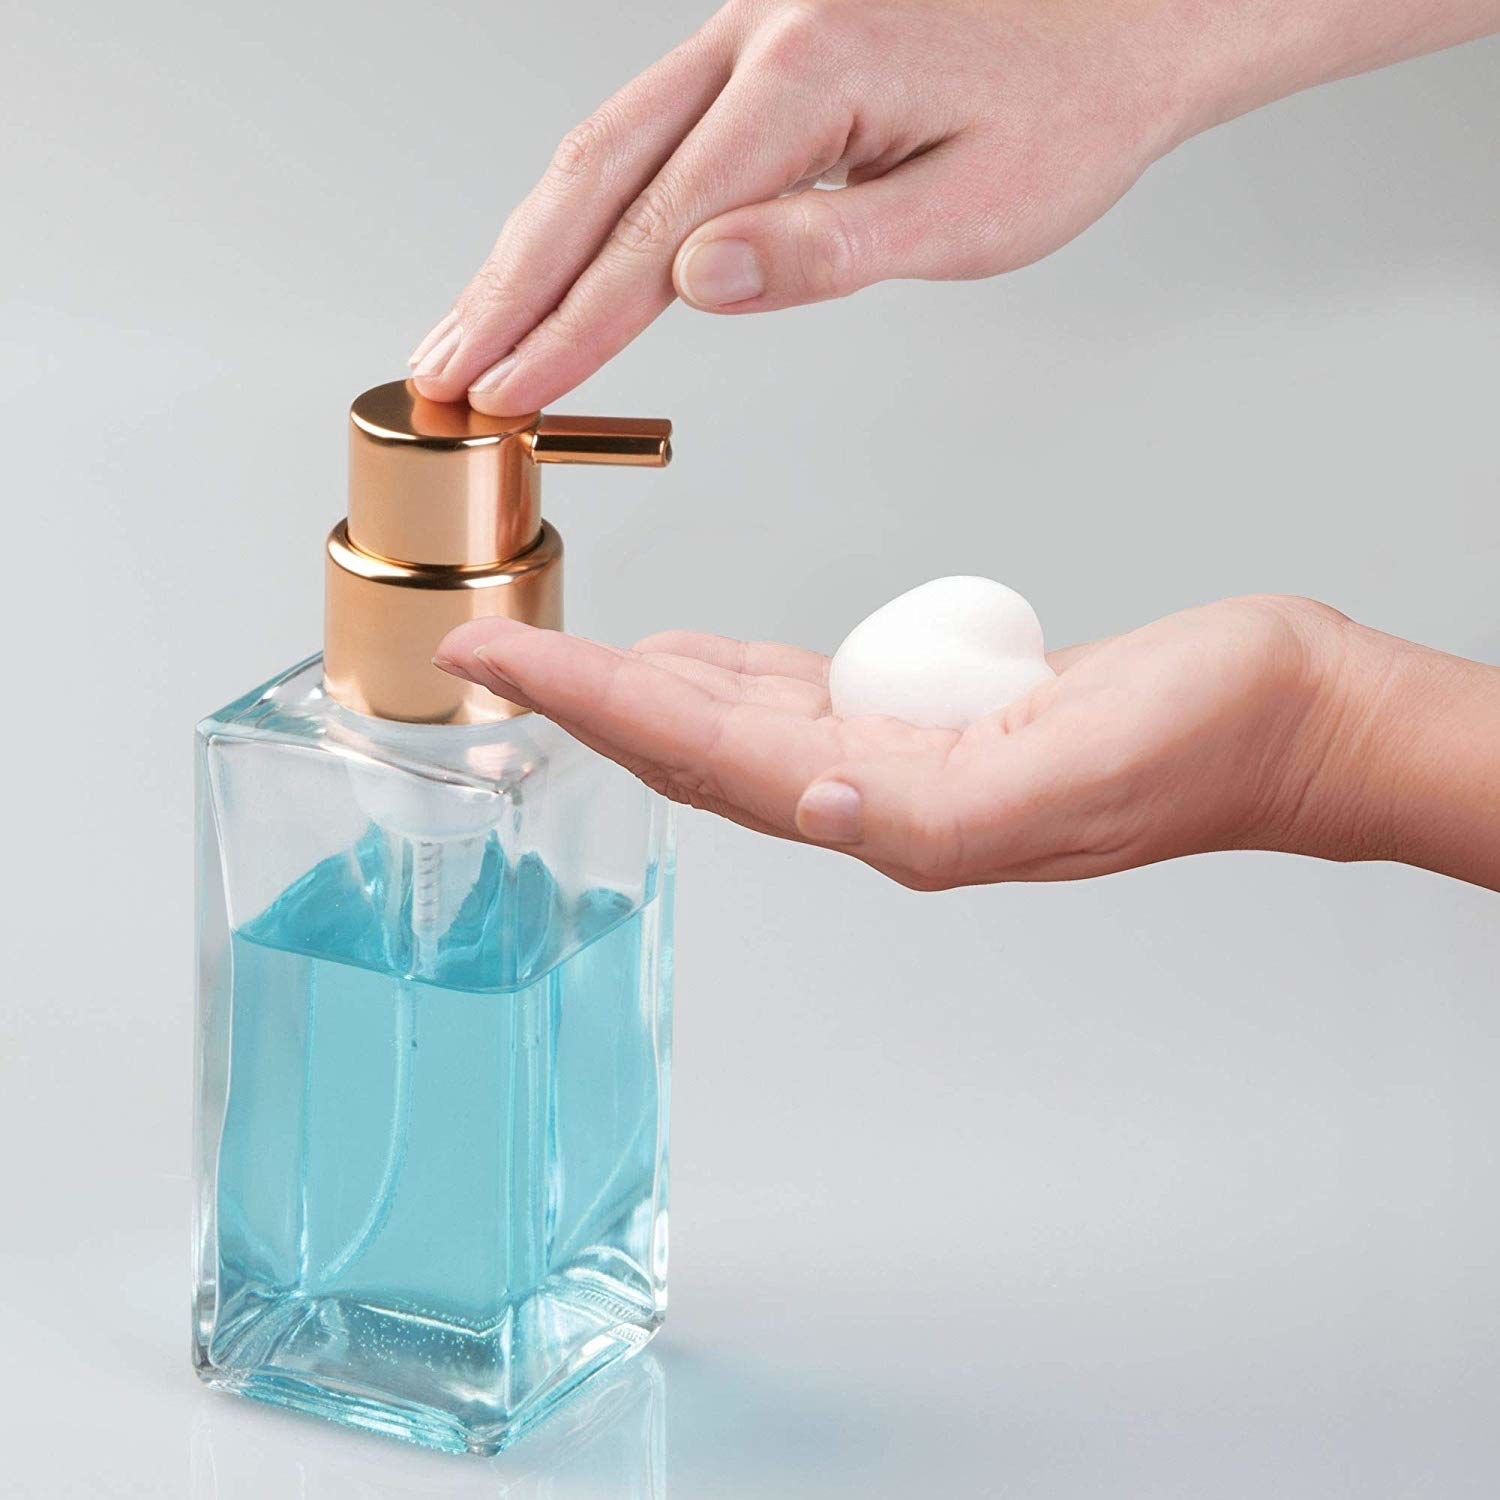 Model using the clear soap dispenser with light blue soap to dispense some foam onto their hand